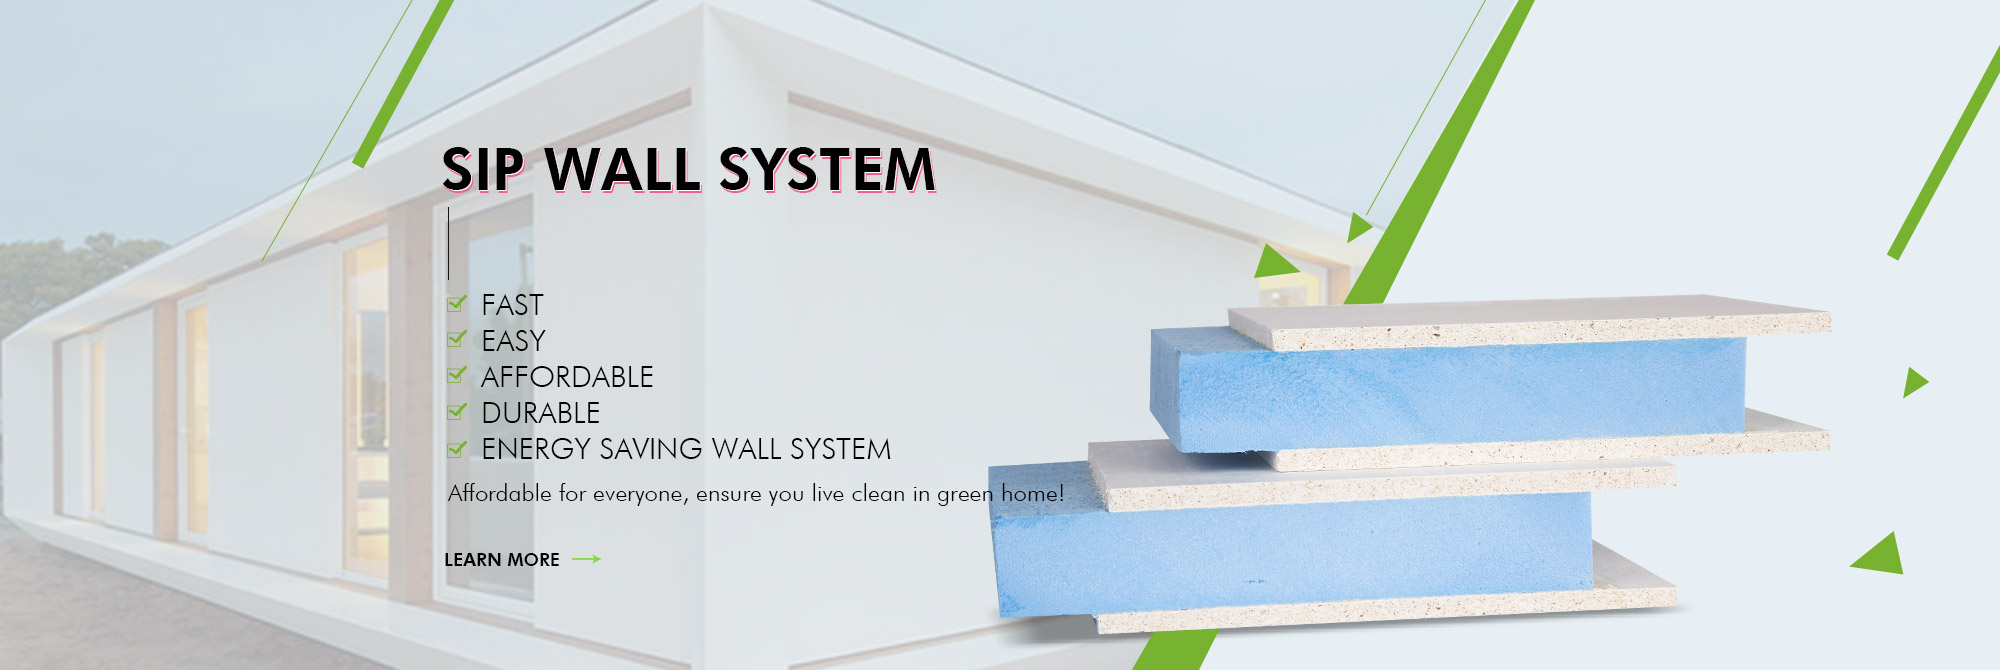 Acoustic Wall Mgo board Export Companies